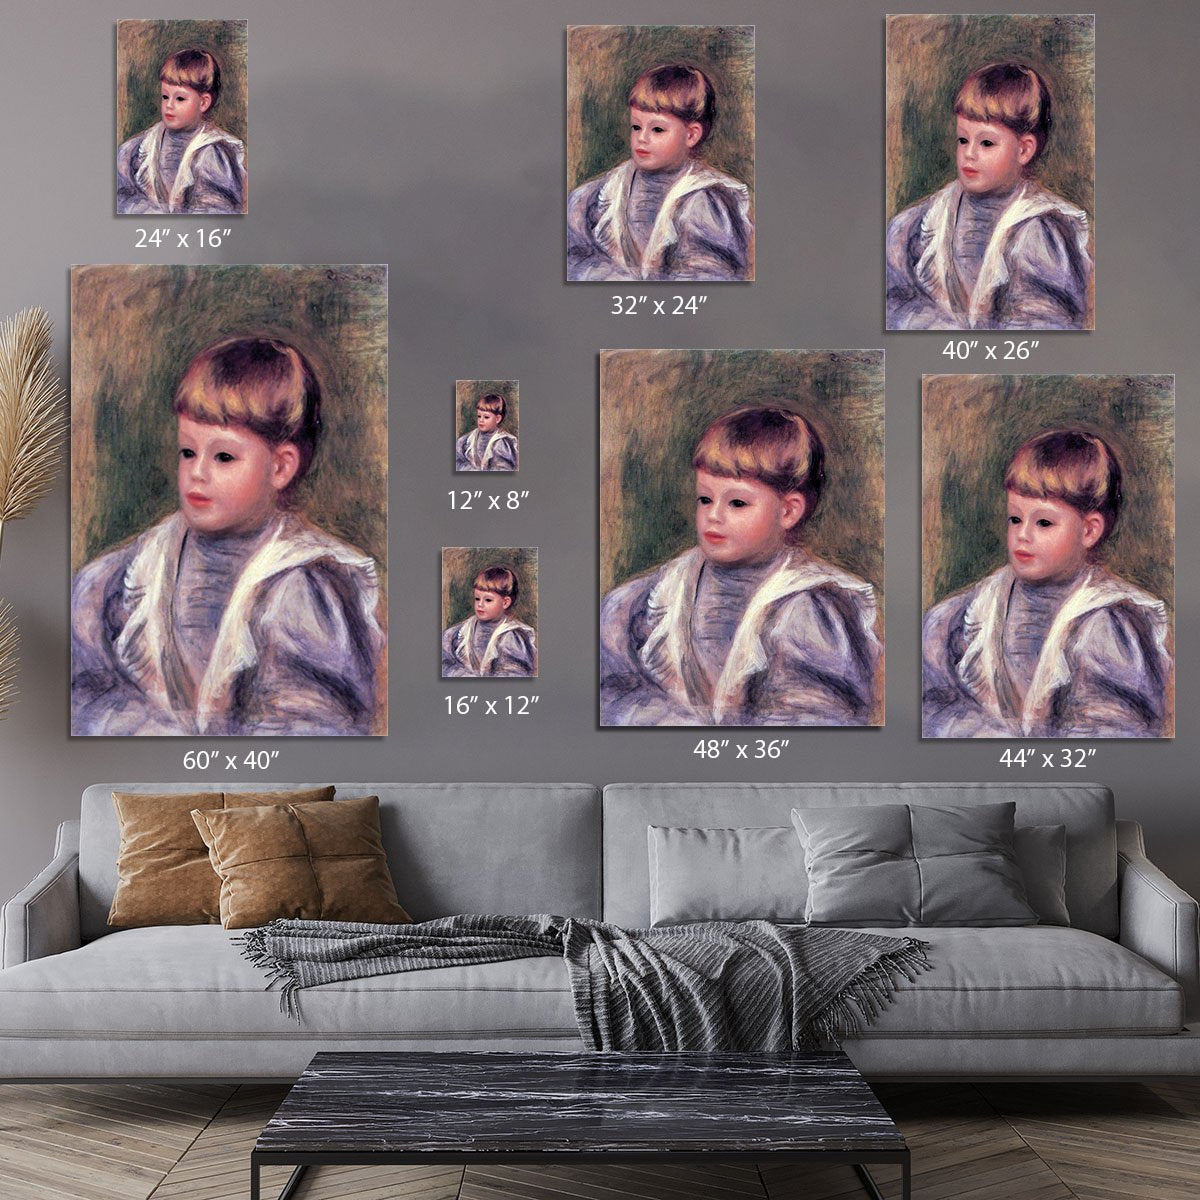 Portrait of a child Philippe Gangnat by Renoir Canvas Print or Poster